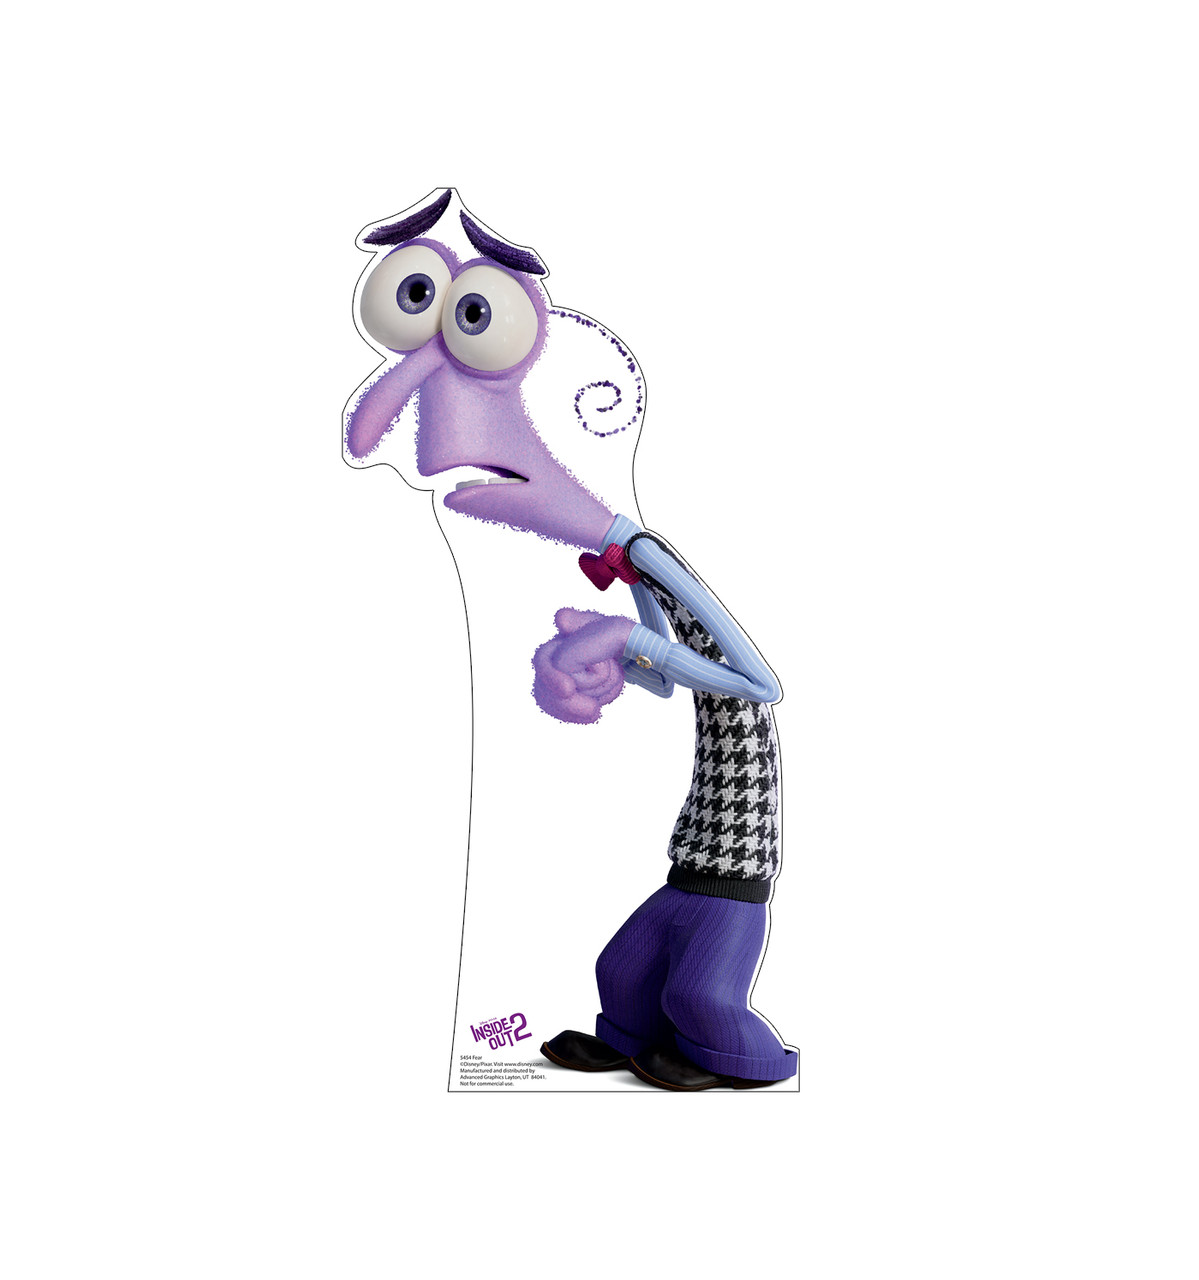 Life-size cardboard standee of Fear from Inside Out 2.